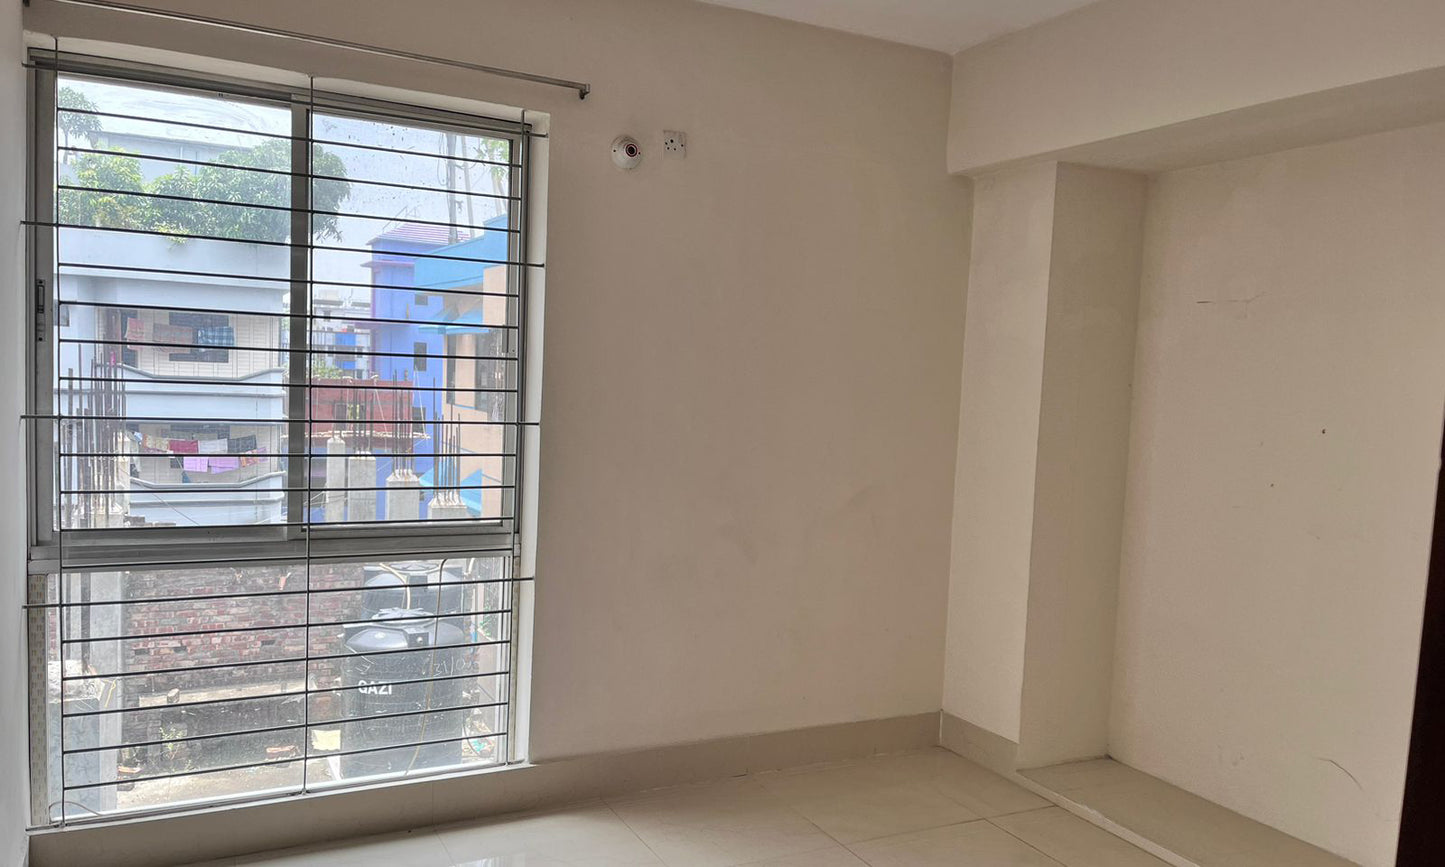 A 1400 Sq Ft Flat Is Up For Rent In A Well Secured Location Of Sector 13, Uttara